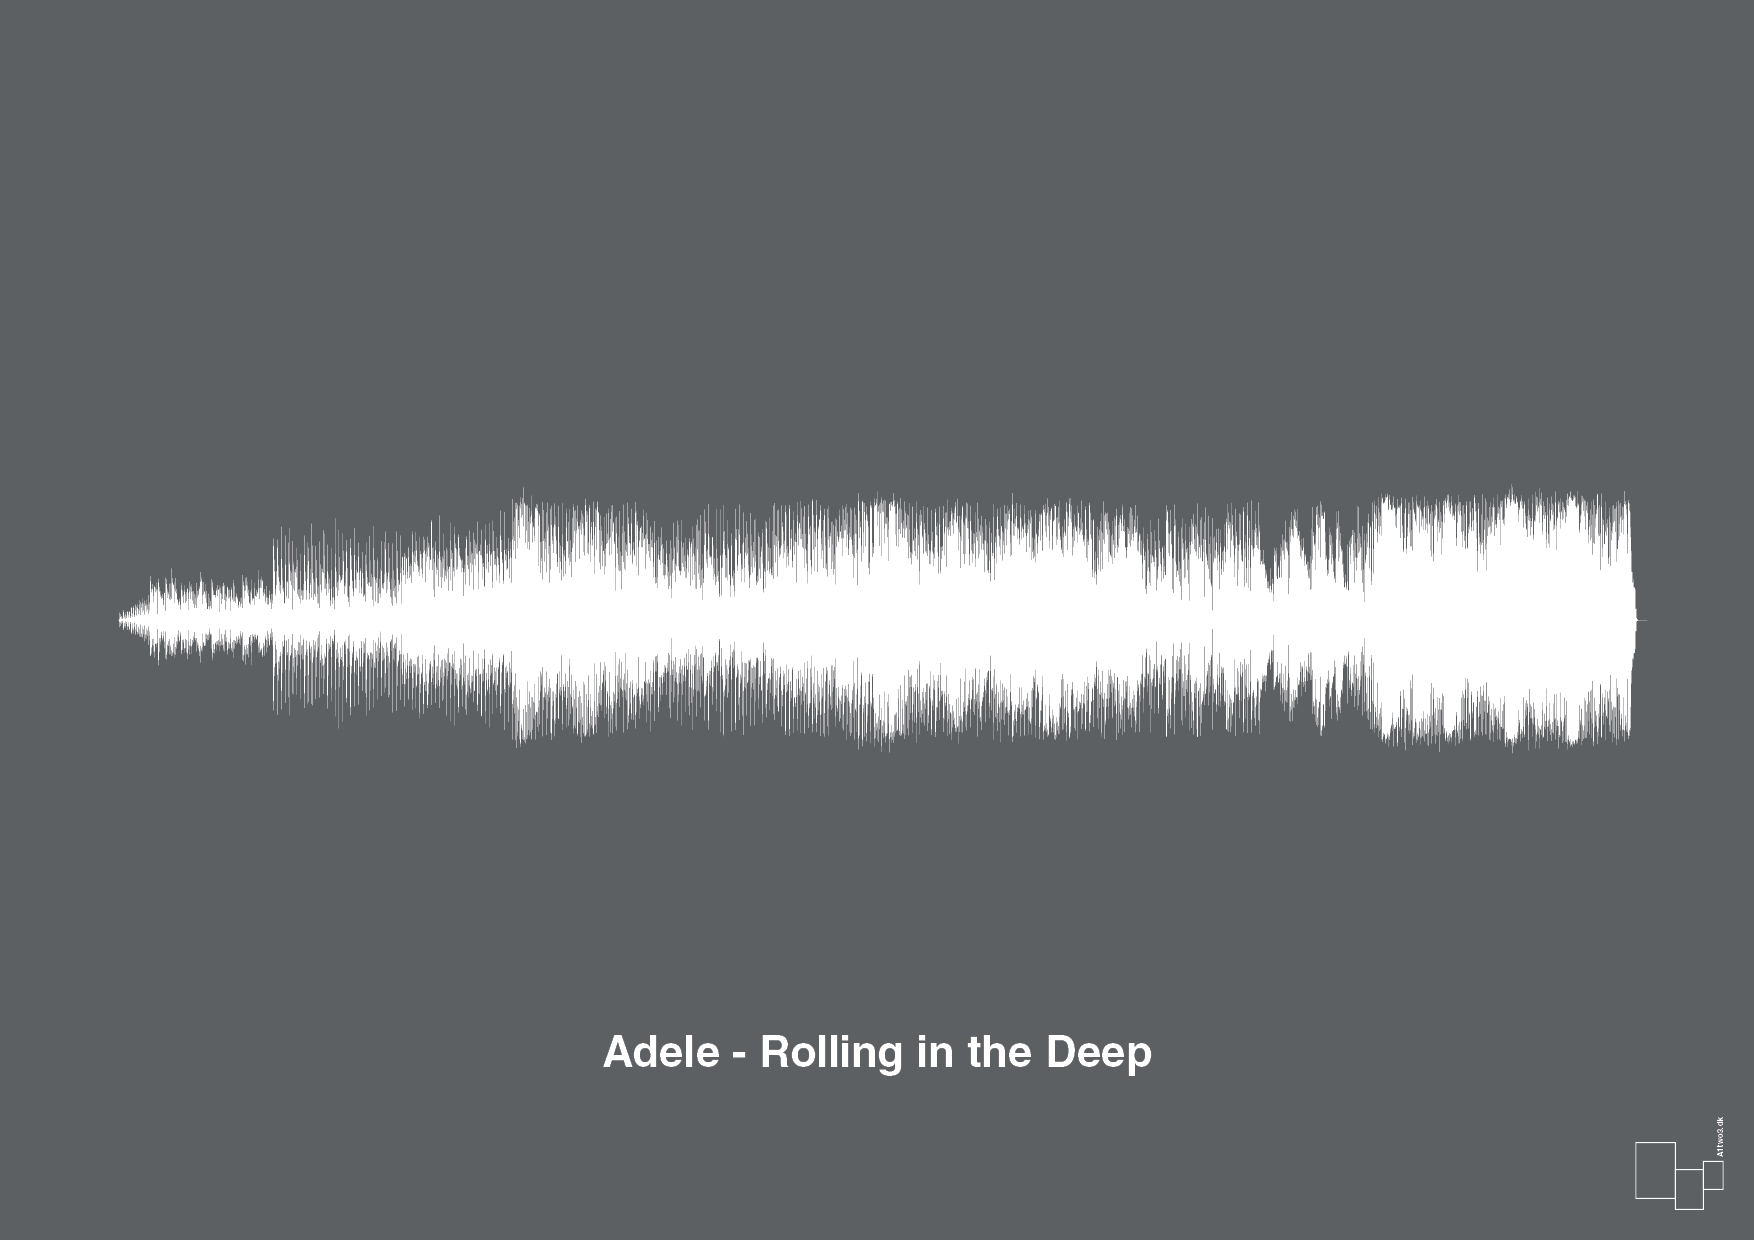 adele - rolling in the deep - Plakat med Musik i Graphic Charcoal